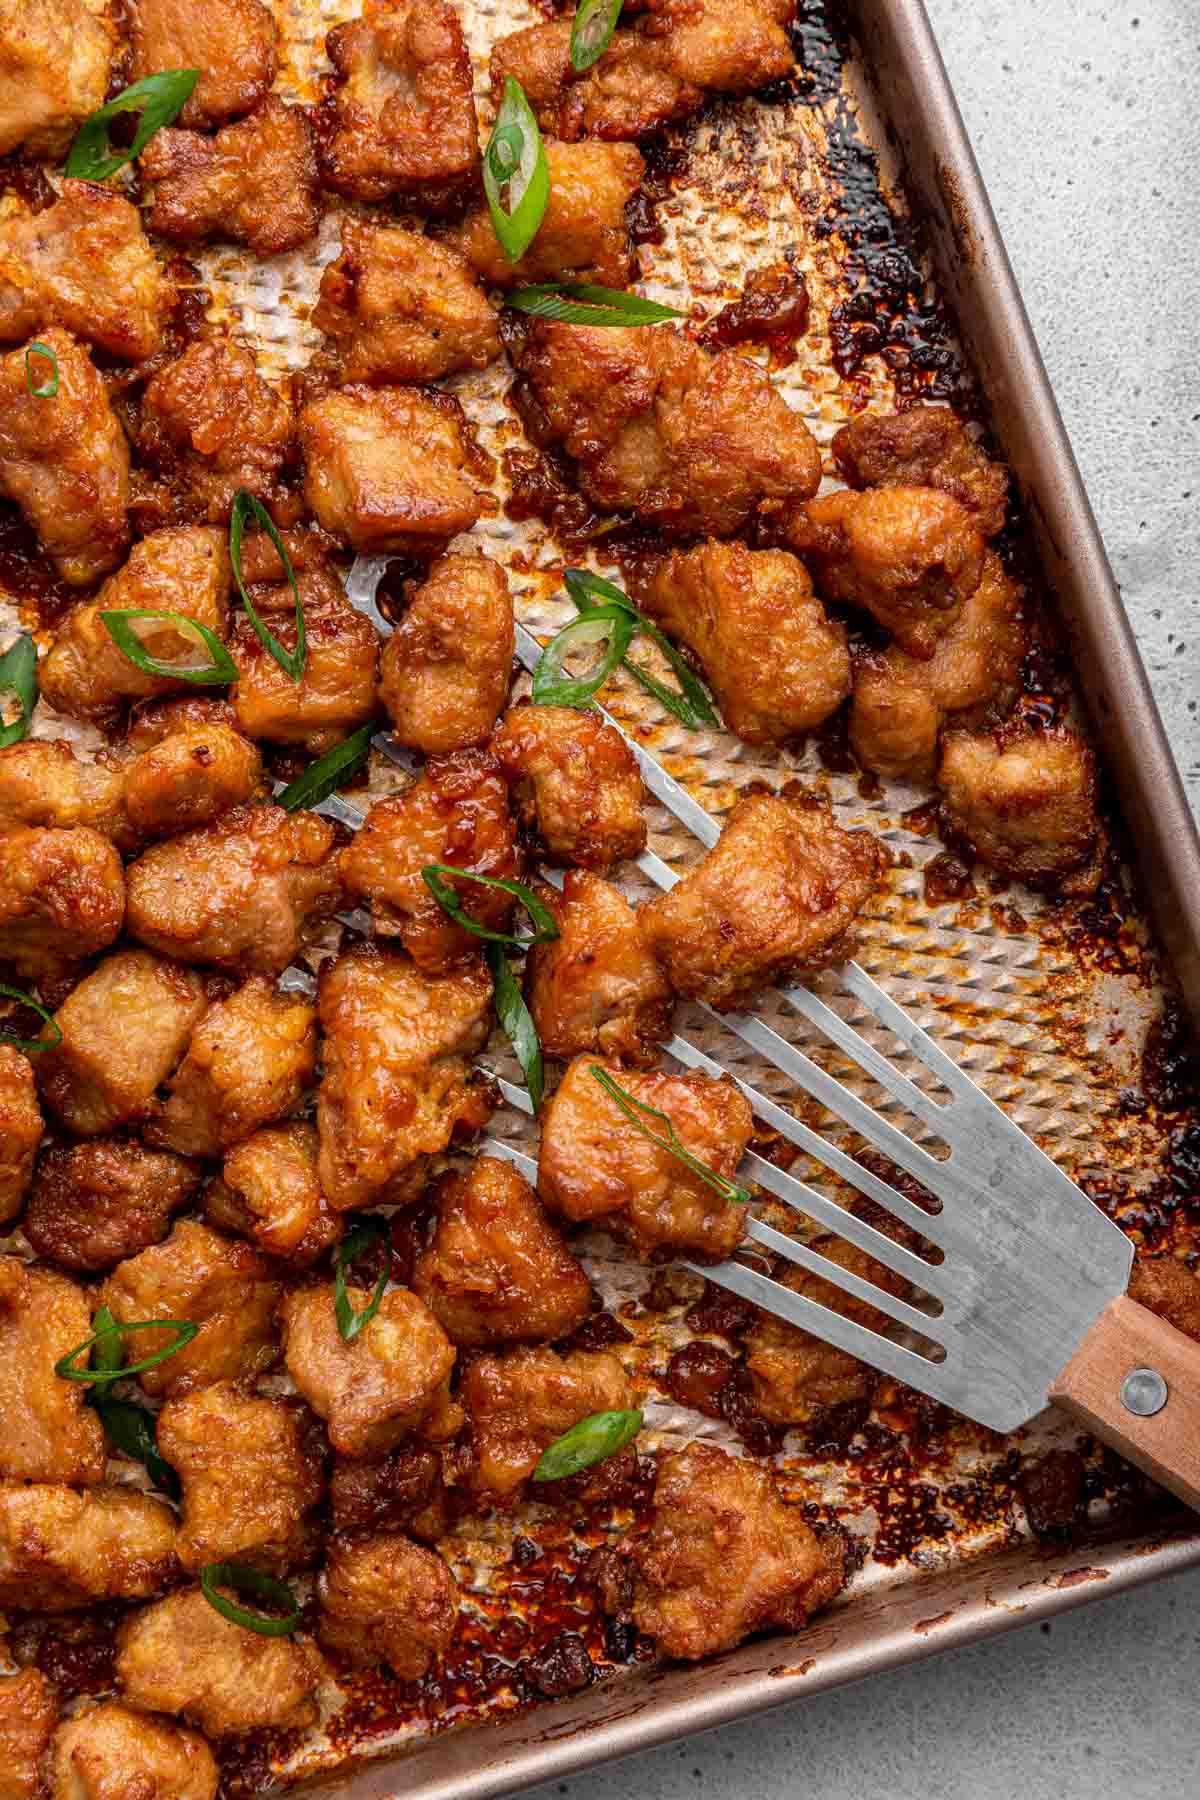 Honey garlic pork pieces on baking sheet with spatula sprinkled with scallions.